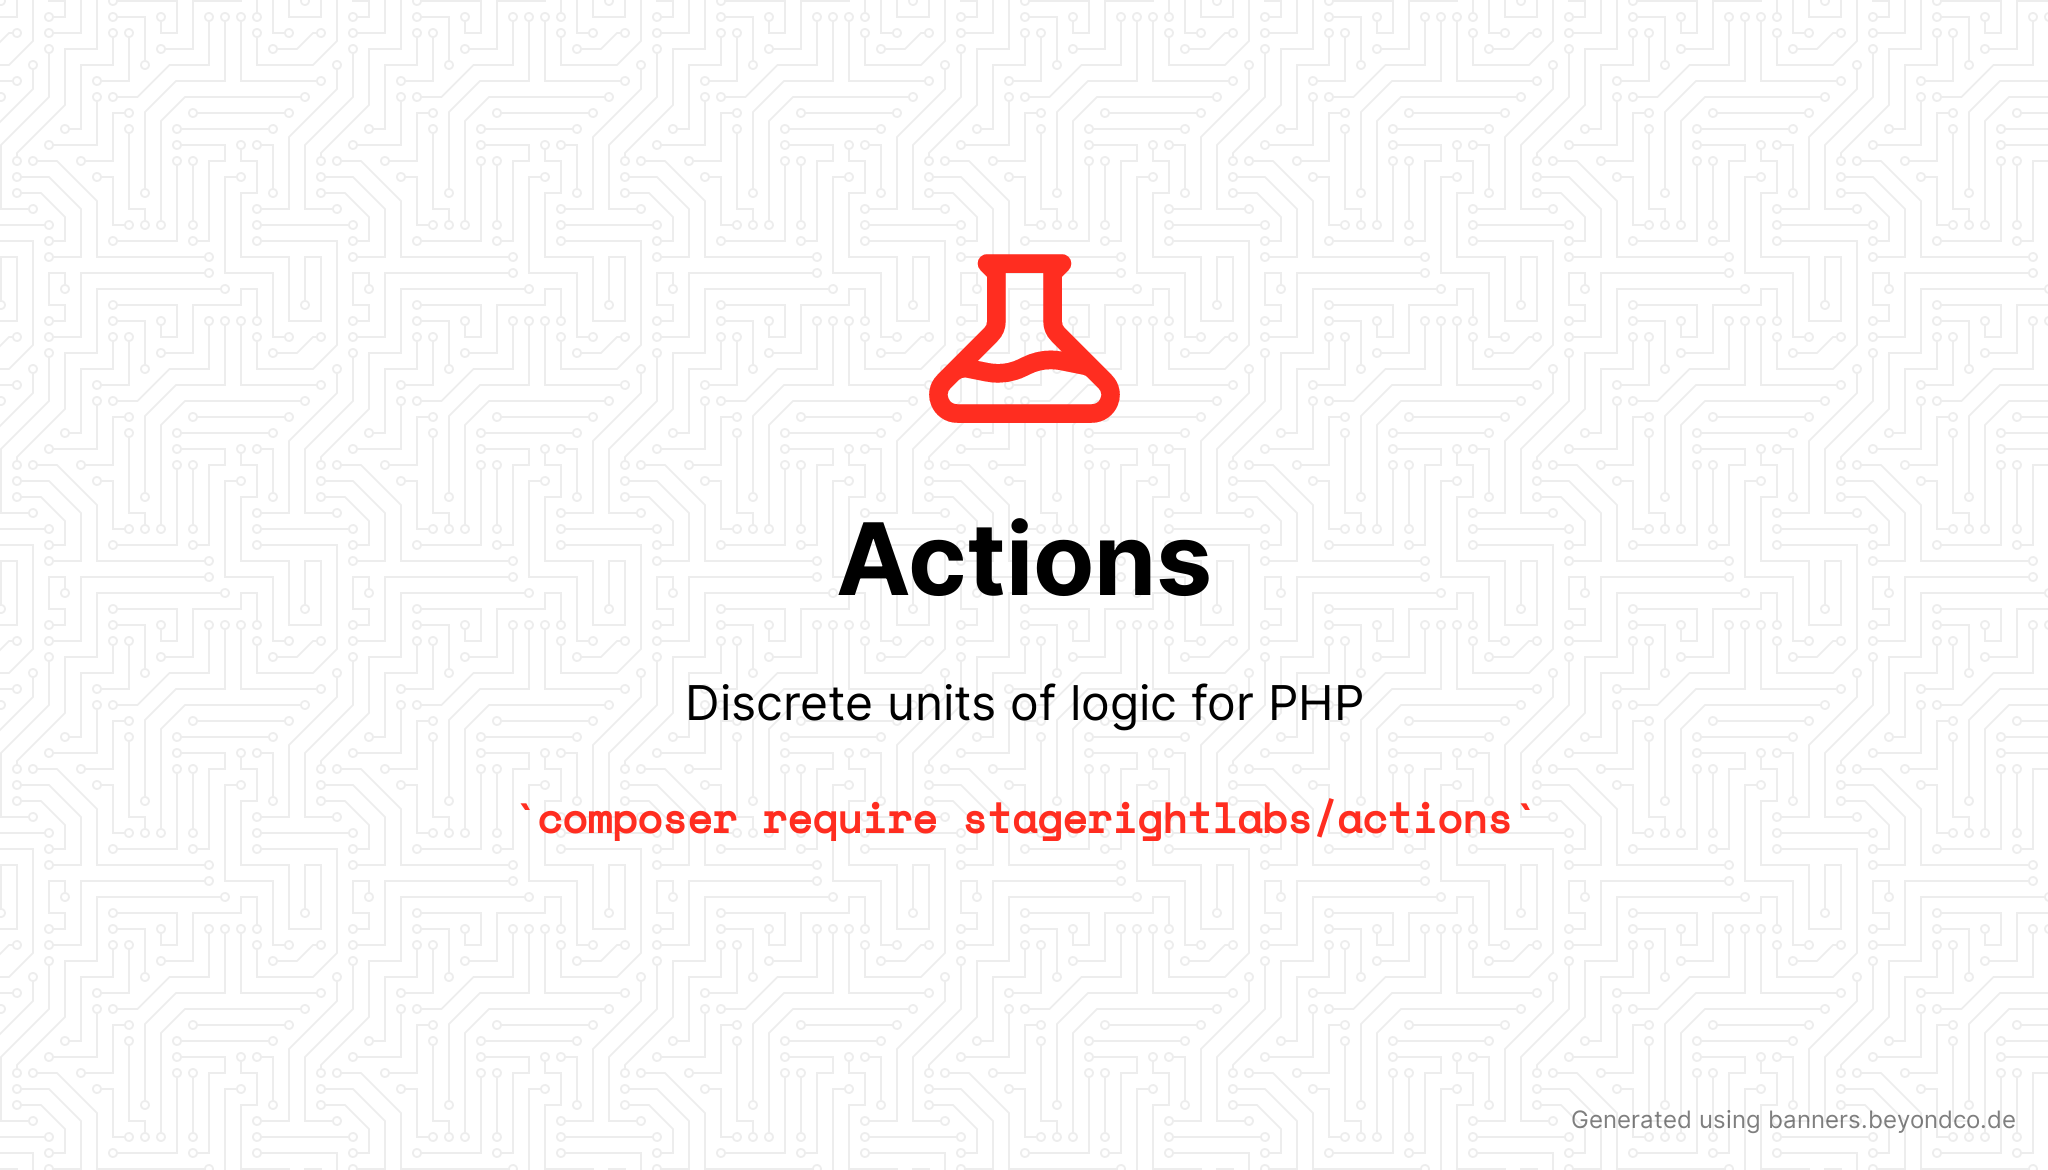 Discrete units of logic for PHP